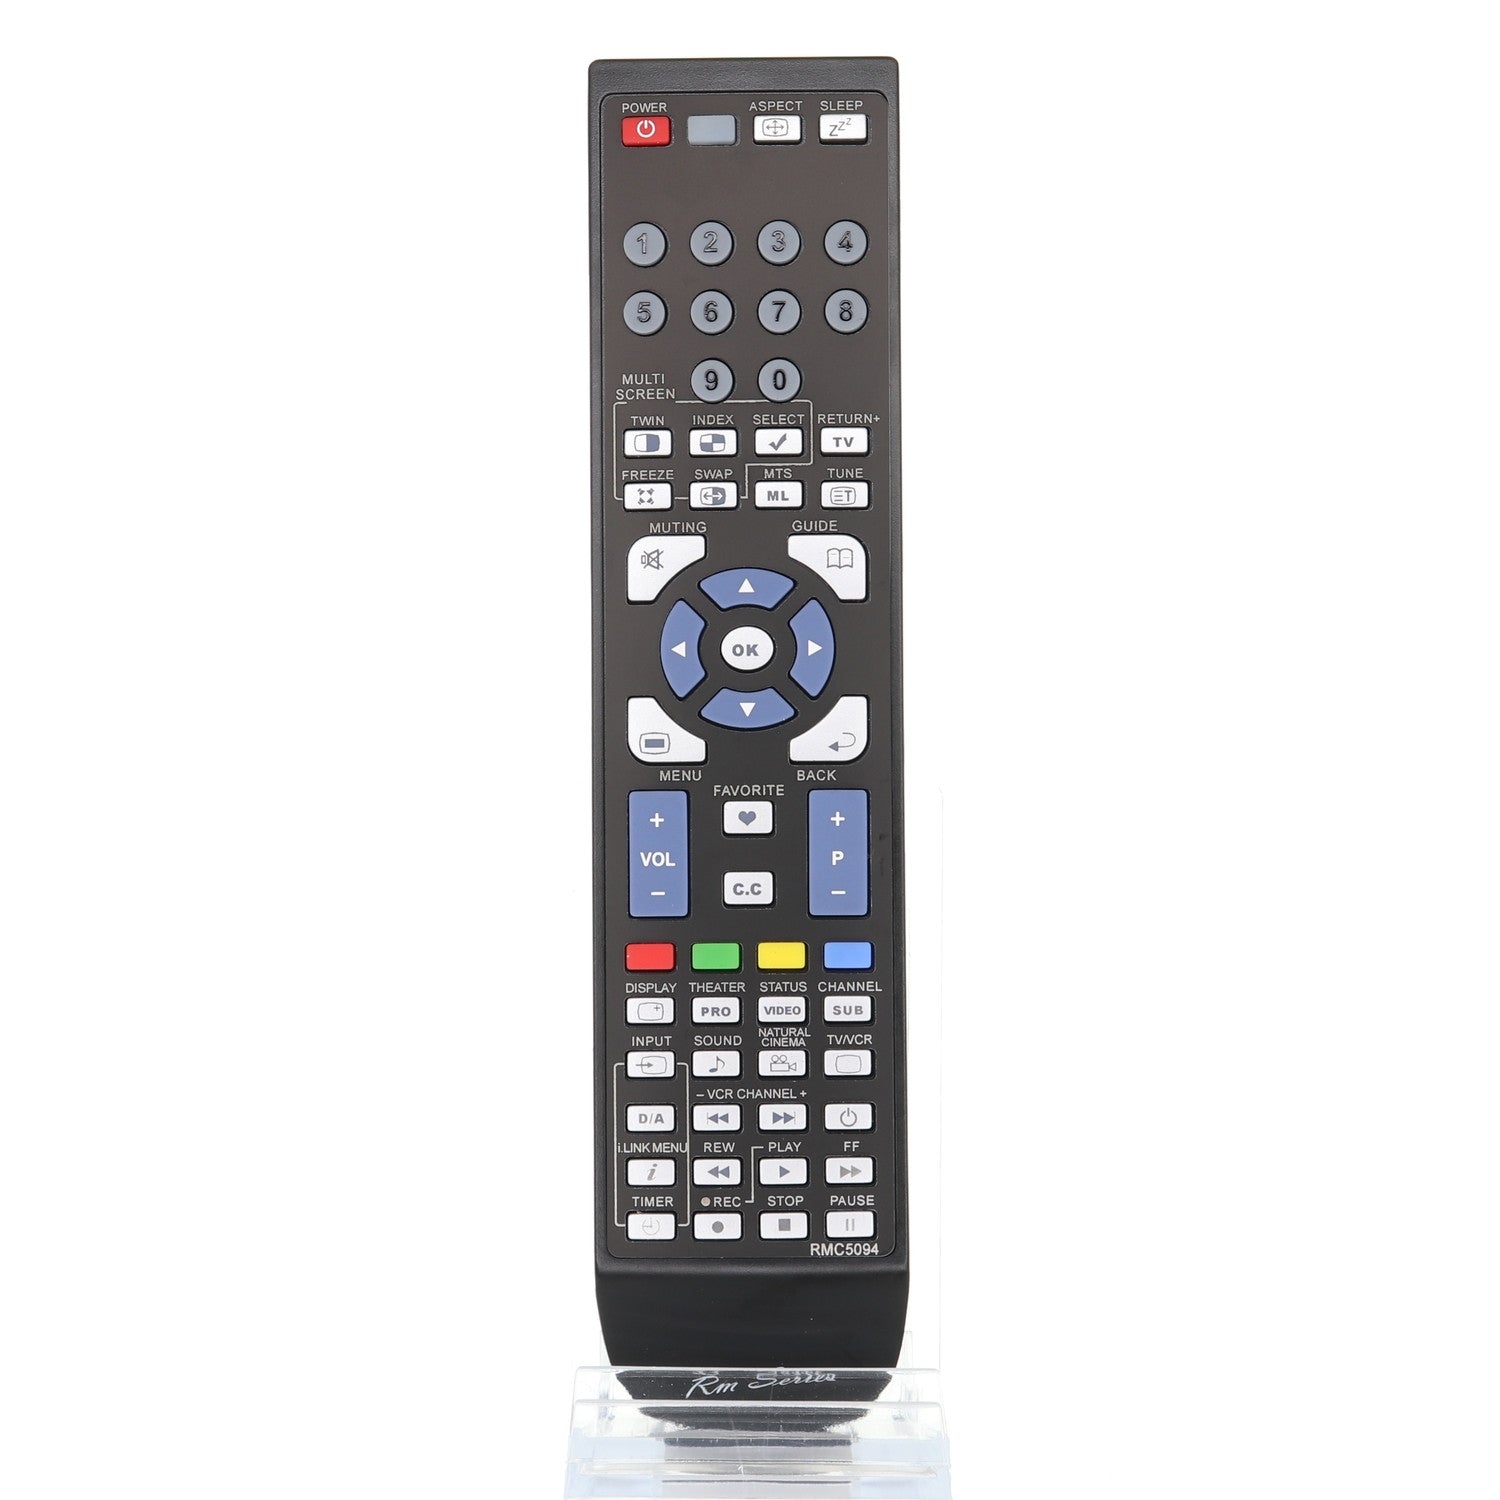 RMC5094 Remote Control for JVC® TVs